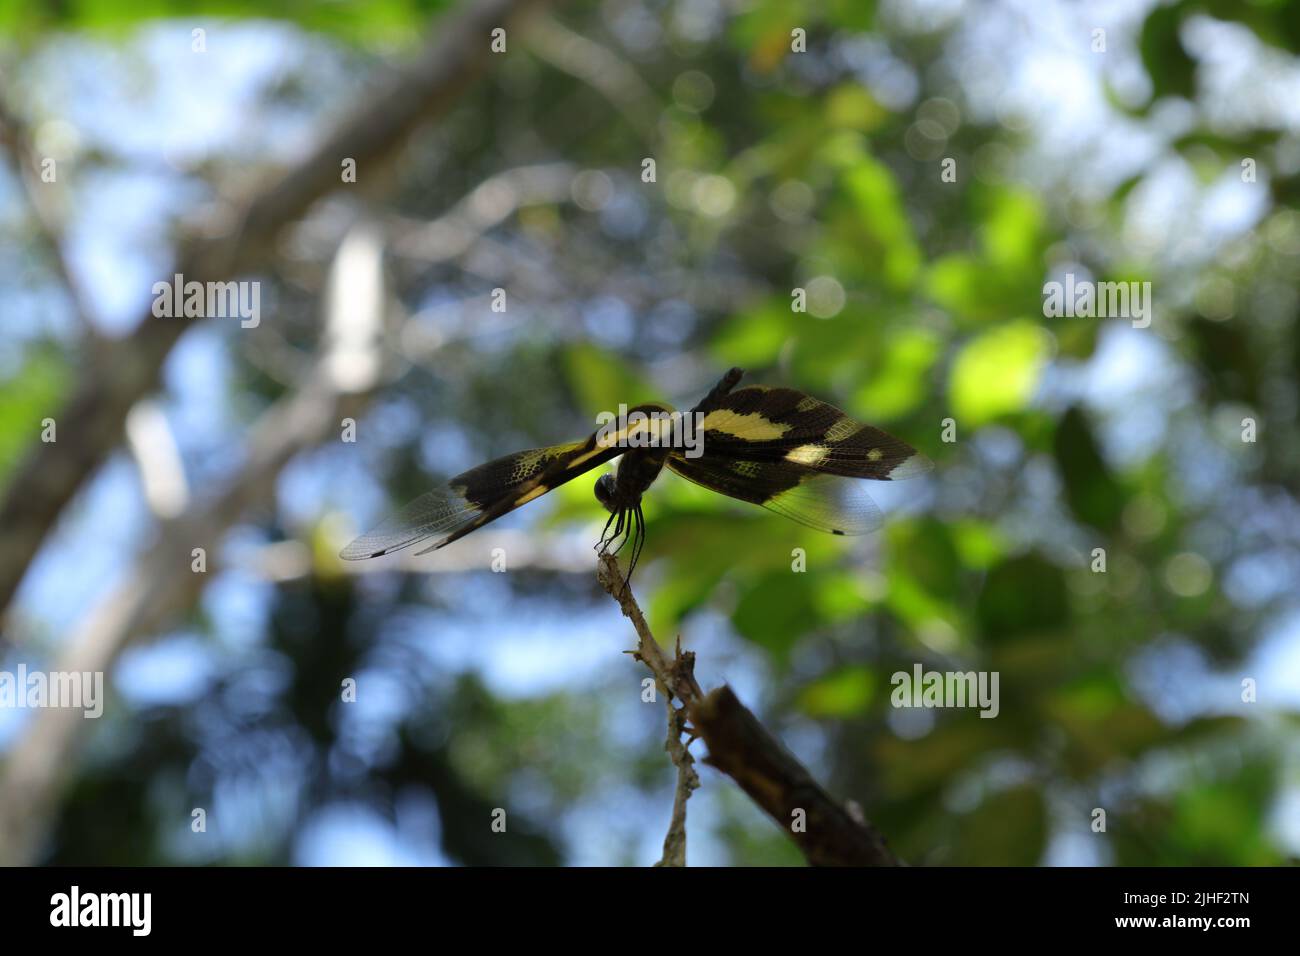 A Variegated Flutterer (Rhyothemis variegata) dragonfly is perched on top of a dry stem tip while spreading its wings angled to left, low angle view f Stock Photo